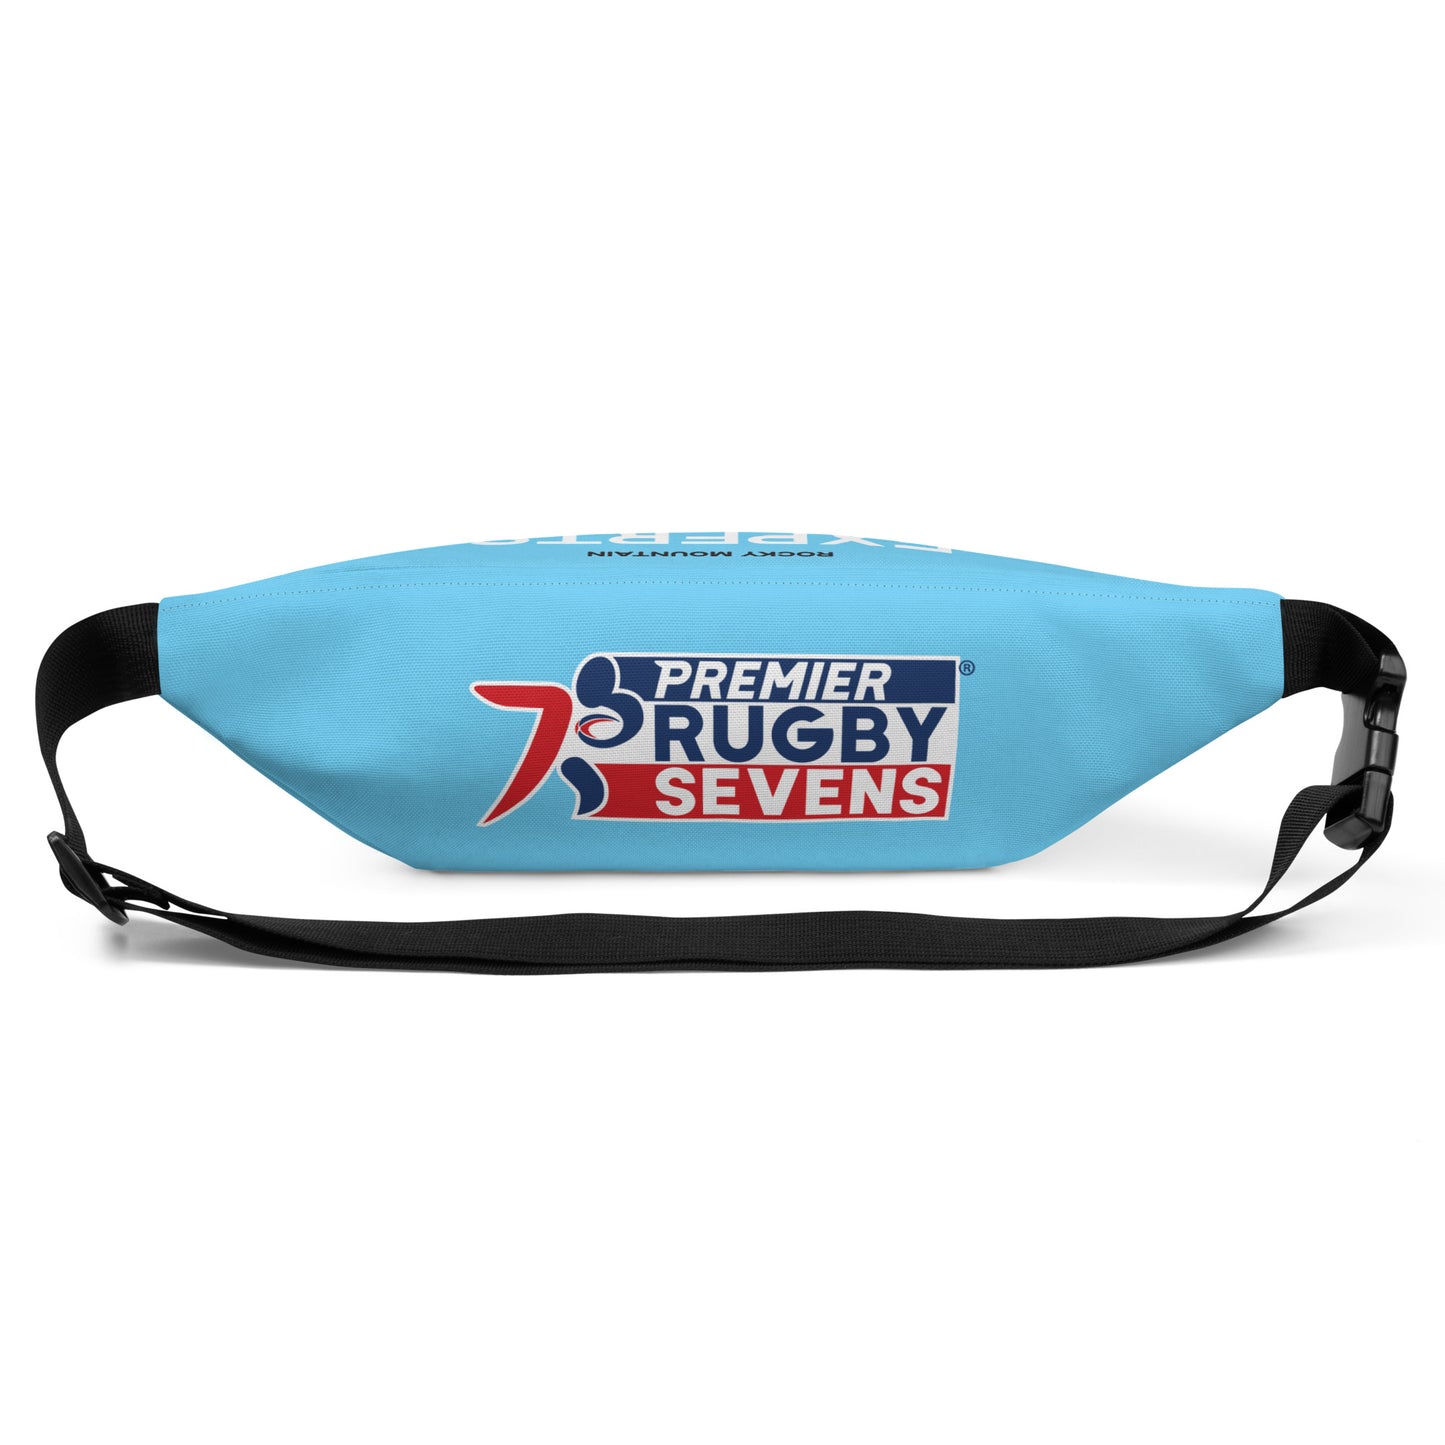 Rocky Mountain Experts Fanny Pack